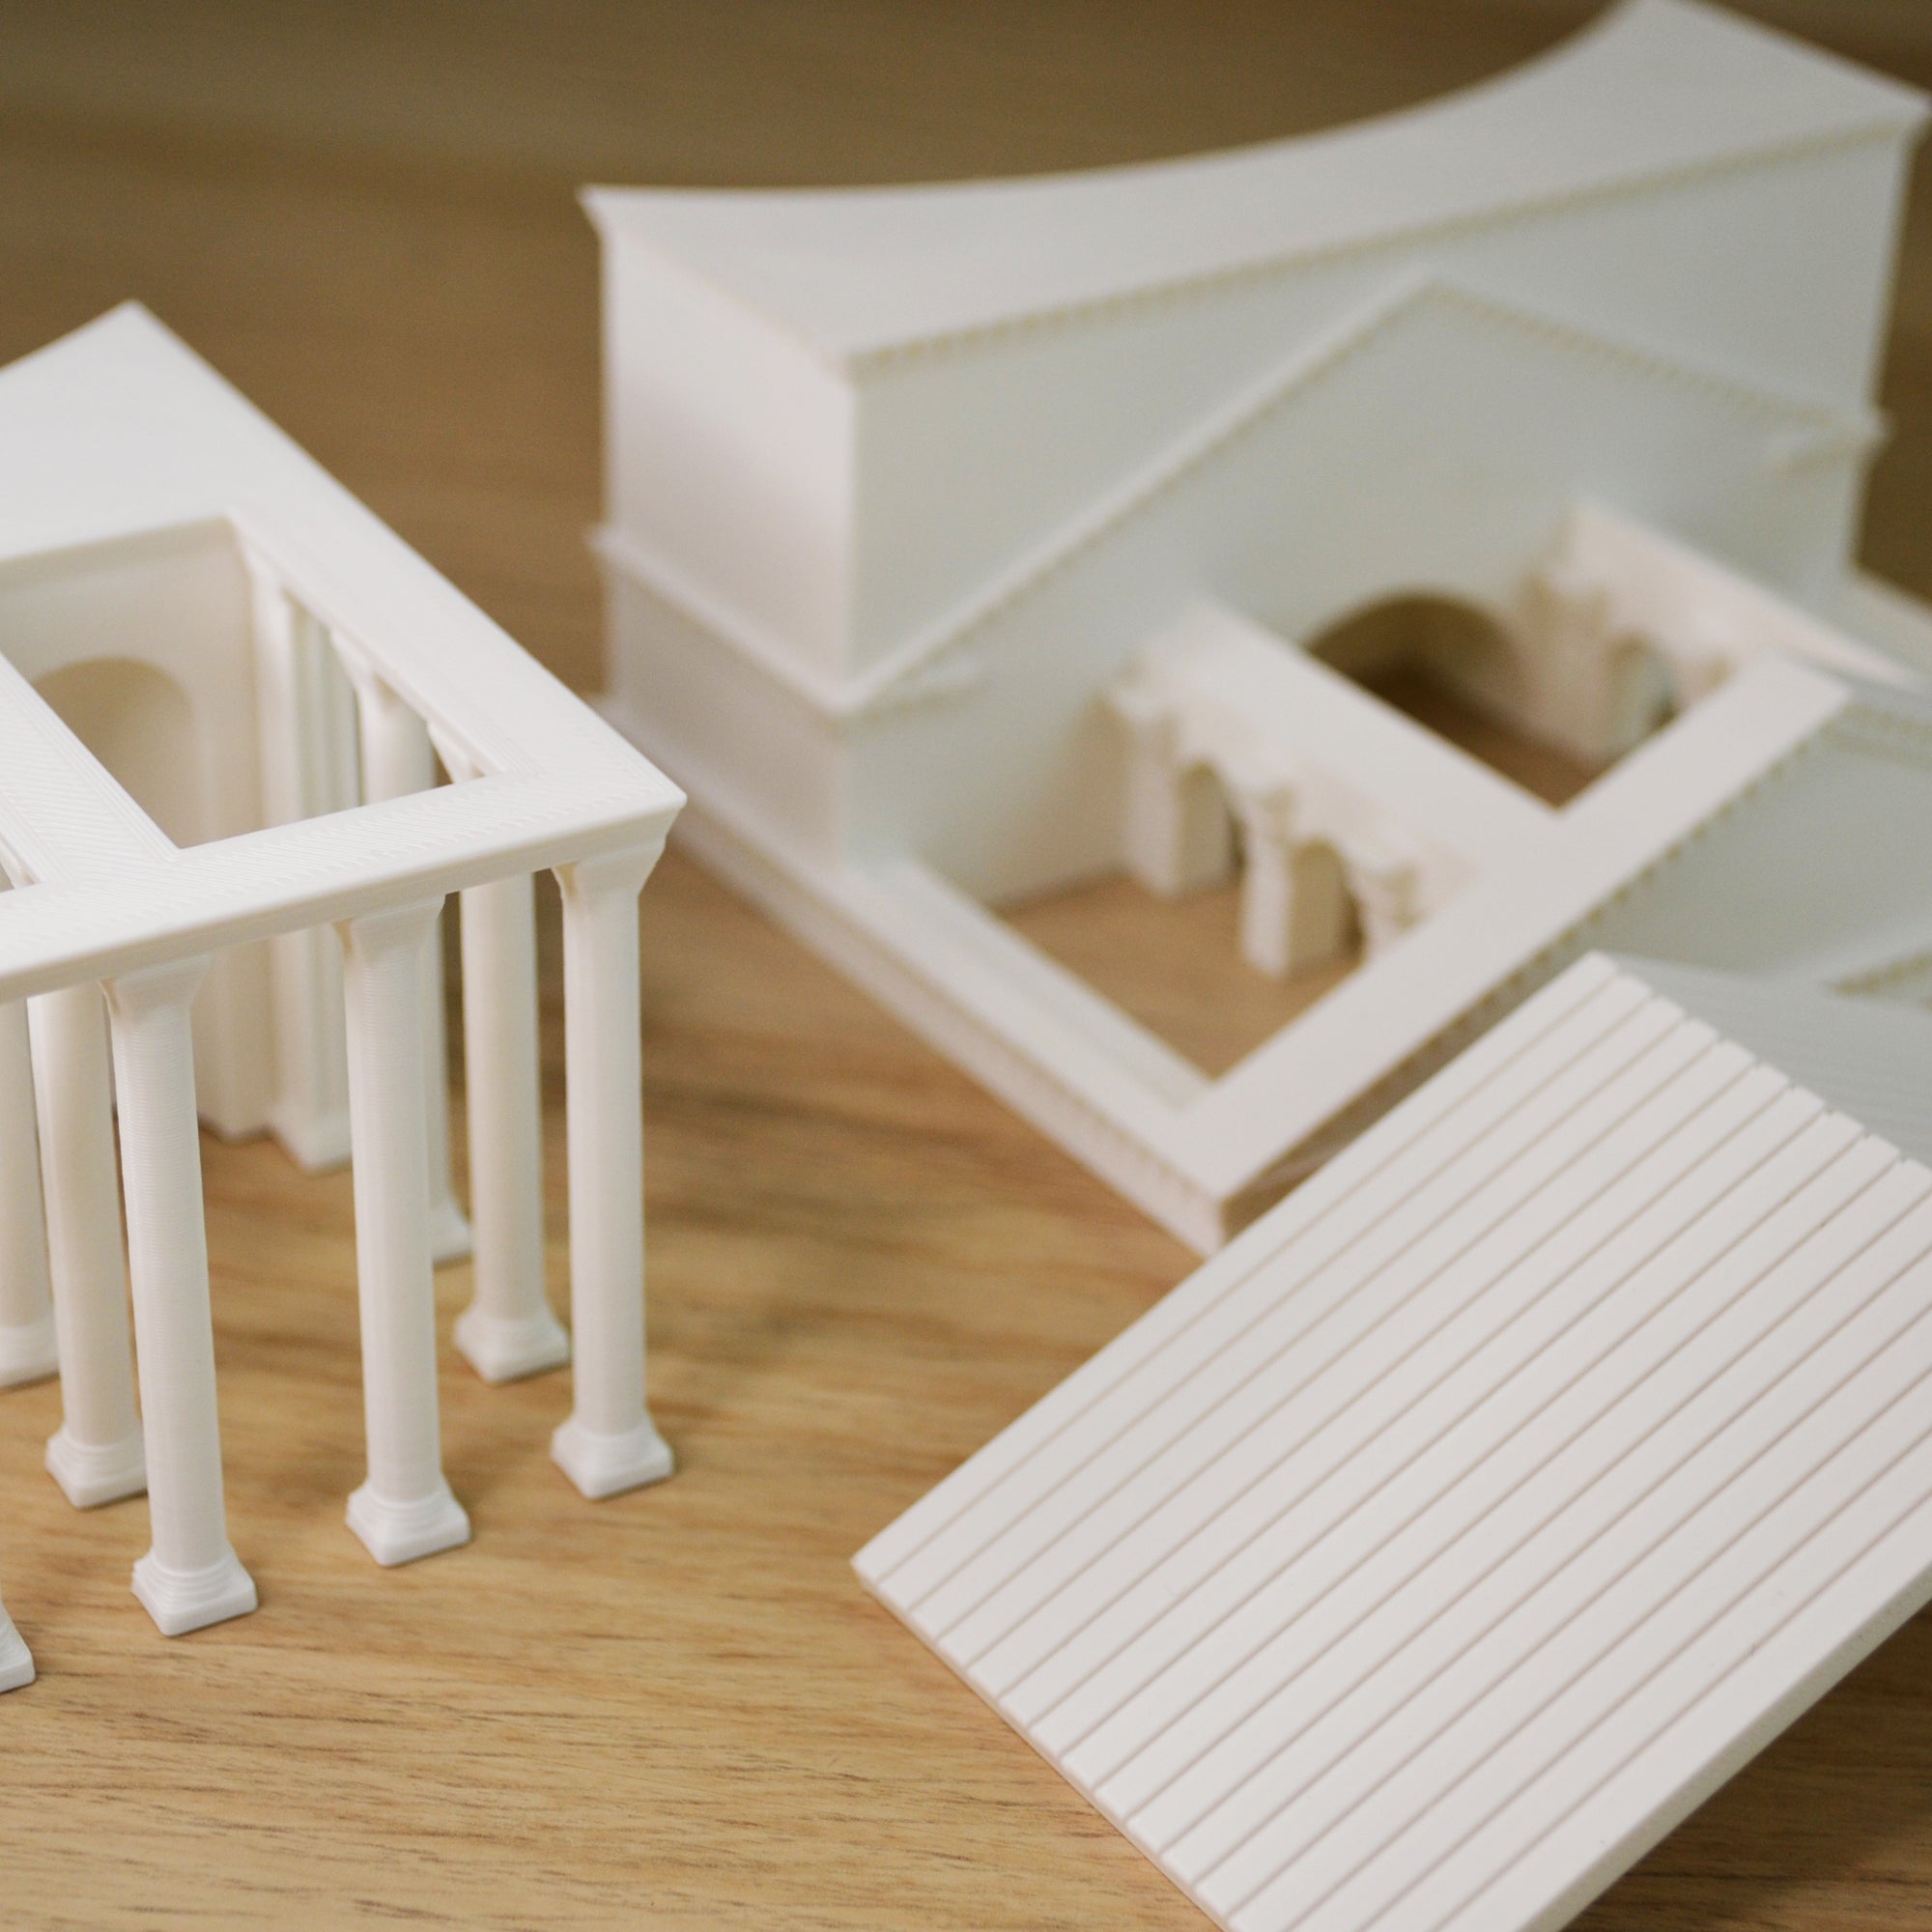 3D Model of the Pantheon: Immersive Architecture and Design Experience